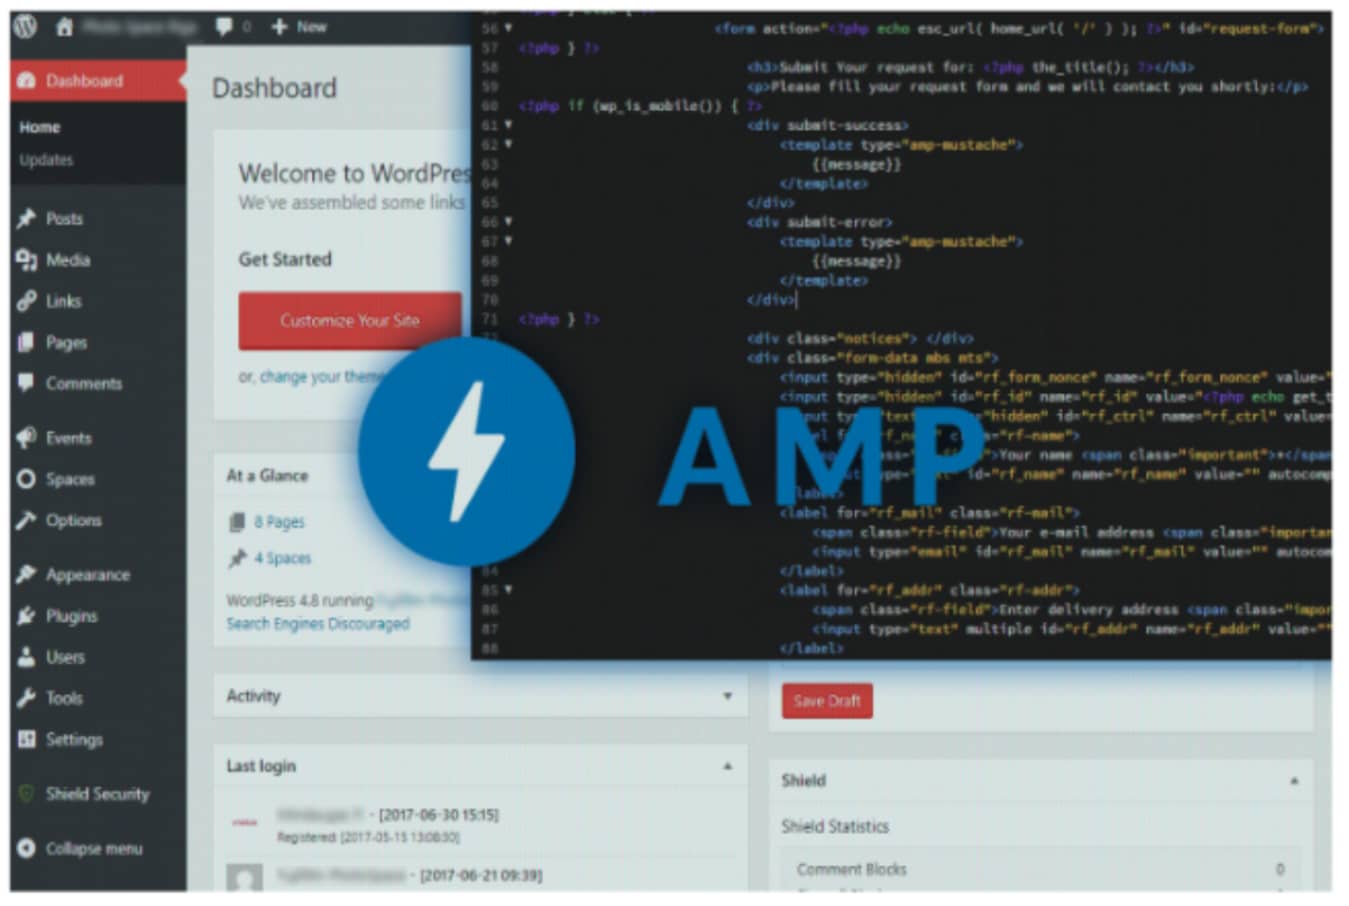 AMP for Email: why so secure and how to get whitelisted?